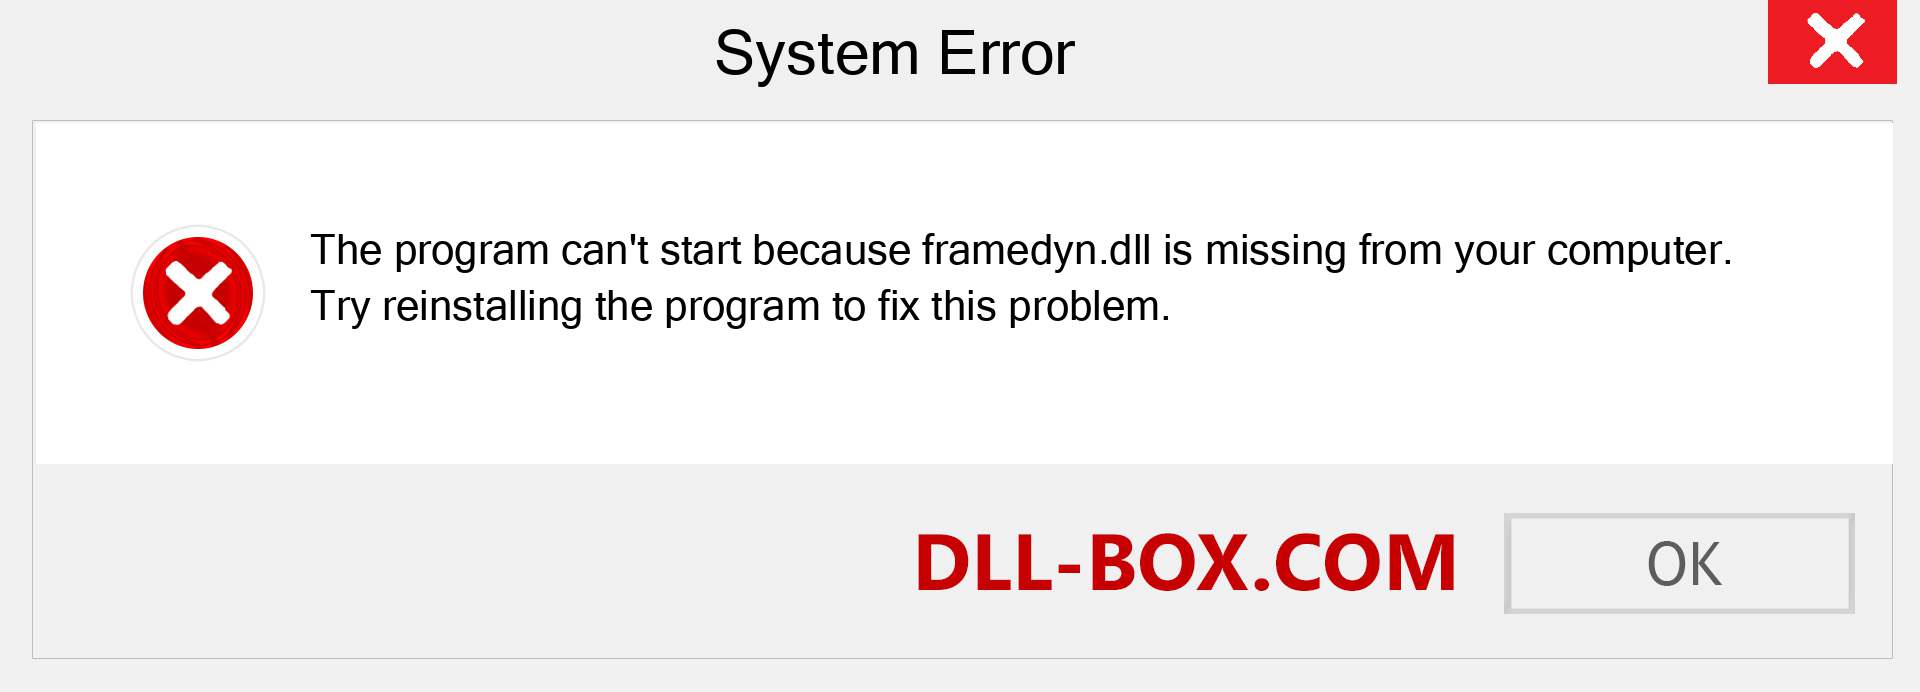  framedyn.dll file is missing?. Download for Windows 7, 8, 10 - Fix  framedyn dll Missing Error on Windows, photos, images